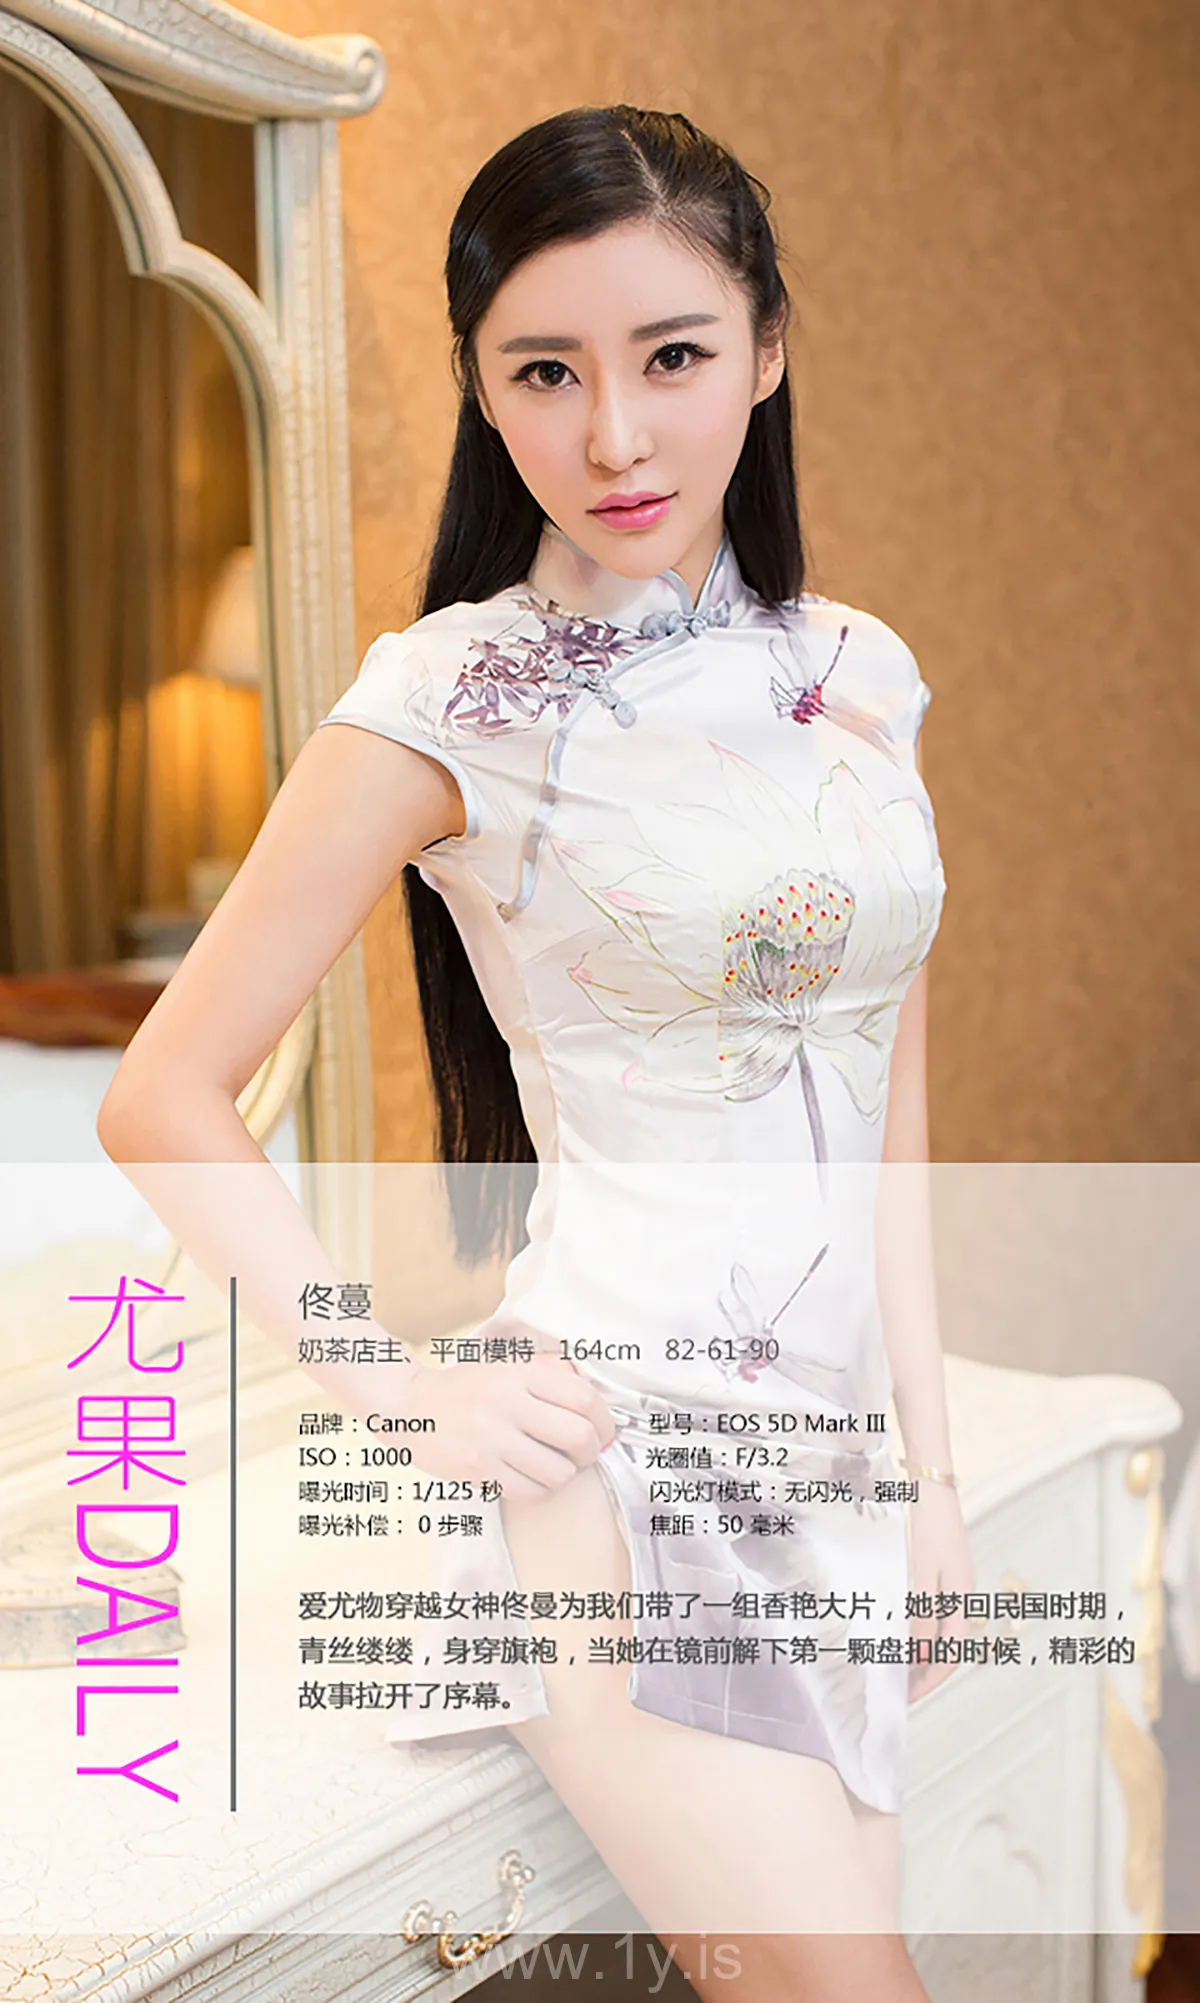 UGIRLS NO.093 Fashionable & Refined Chinese Belle 佟蔓梦回民国青丝缕缕